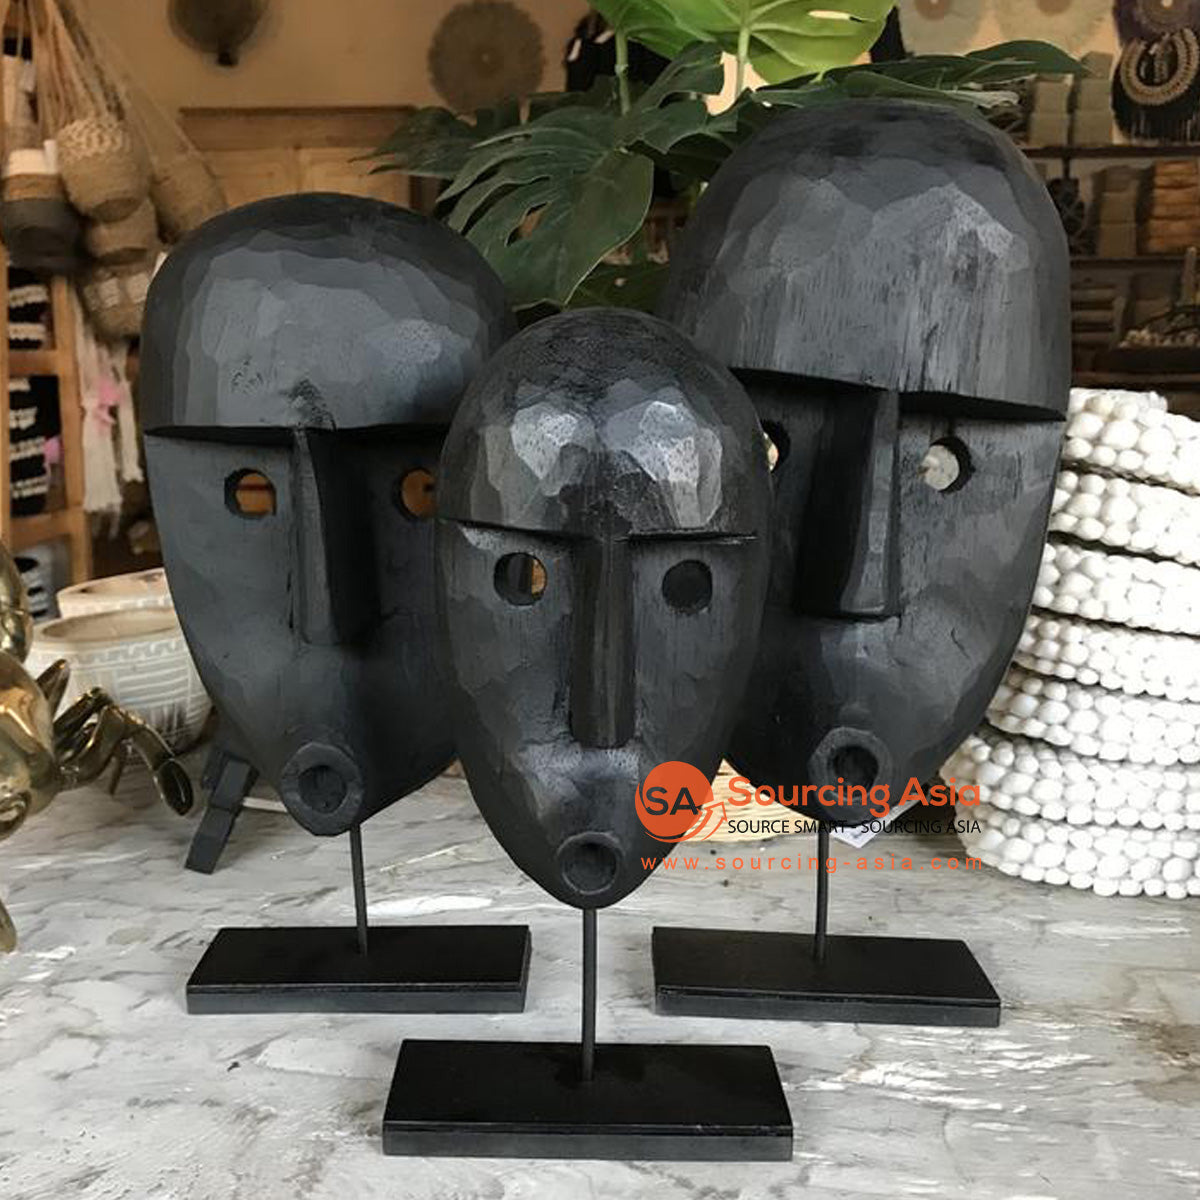 KNTC040 SET OF THREE WOODEN MANYUN MASK ON STAND DECORATIONS - Sourcing Asia